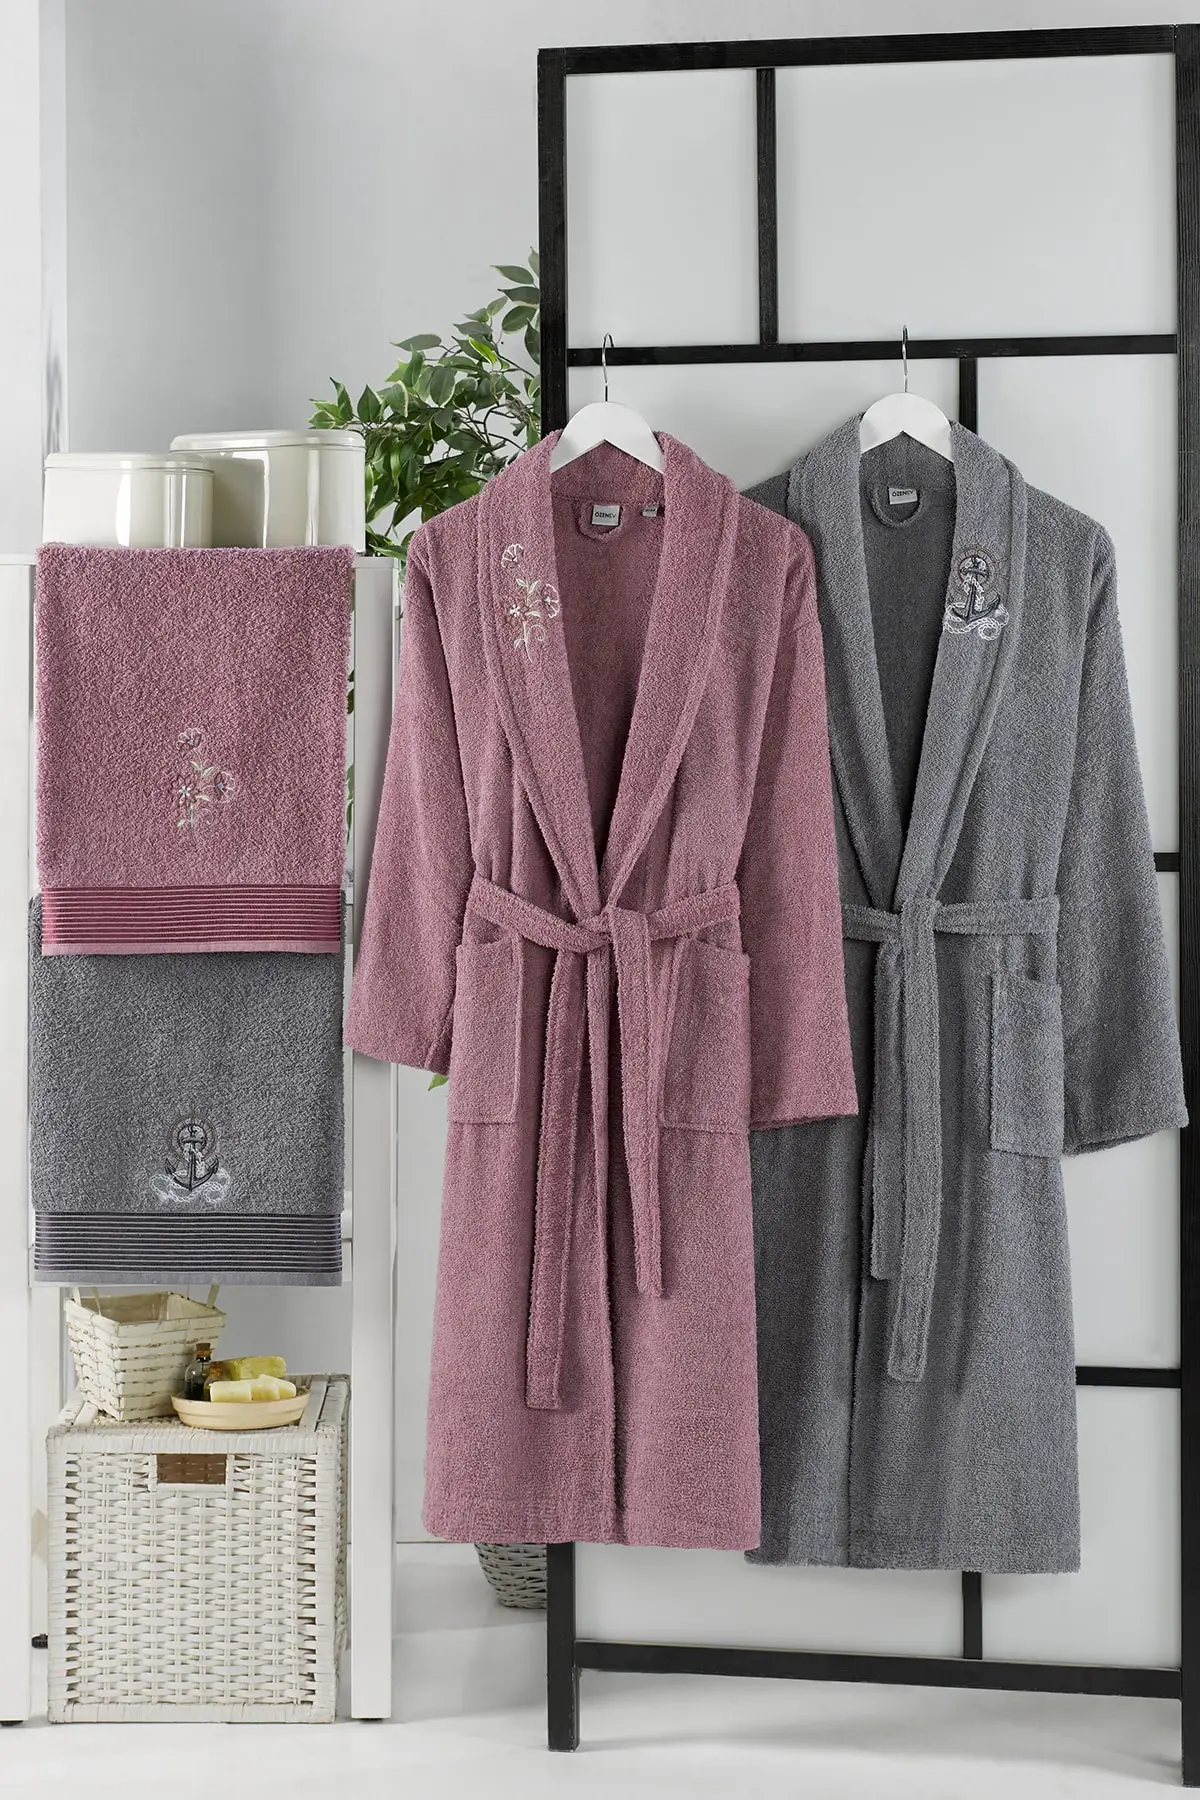 4-Piece Family Bathrobe Set Anthracite Plum - Bath Towels, Hotel Bathrobes, Hand and Face Towels, 100% Cotton, Bath Products